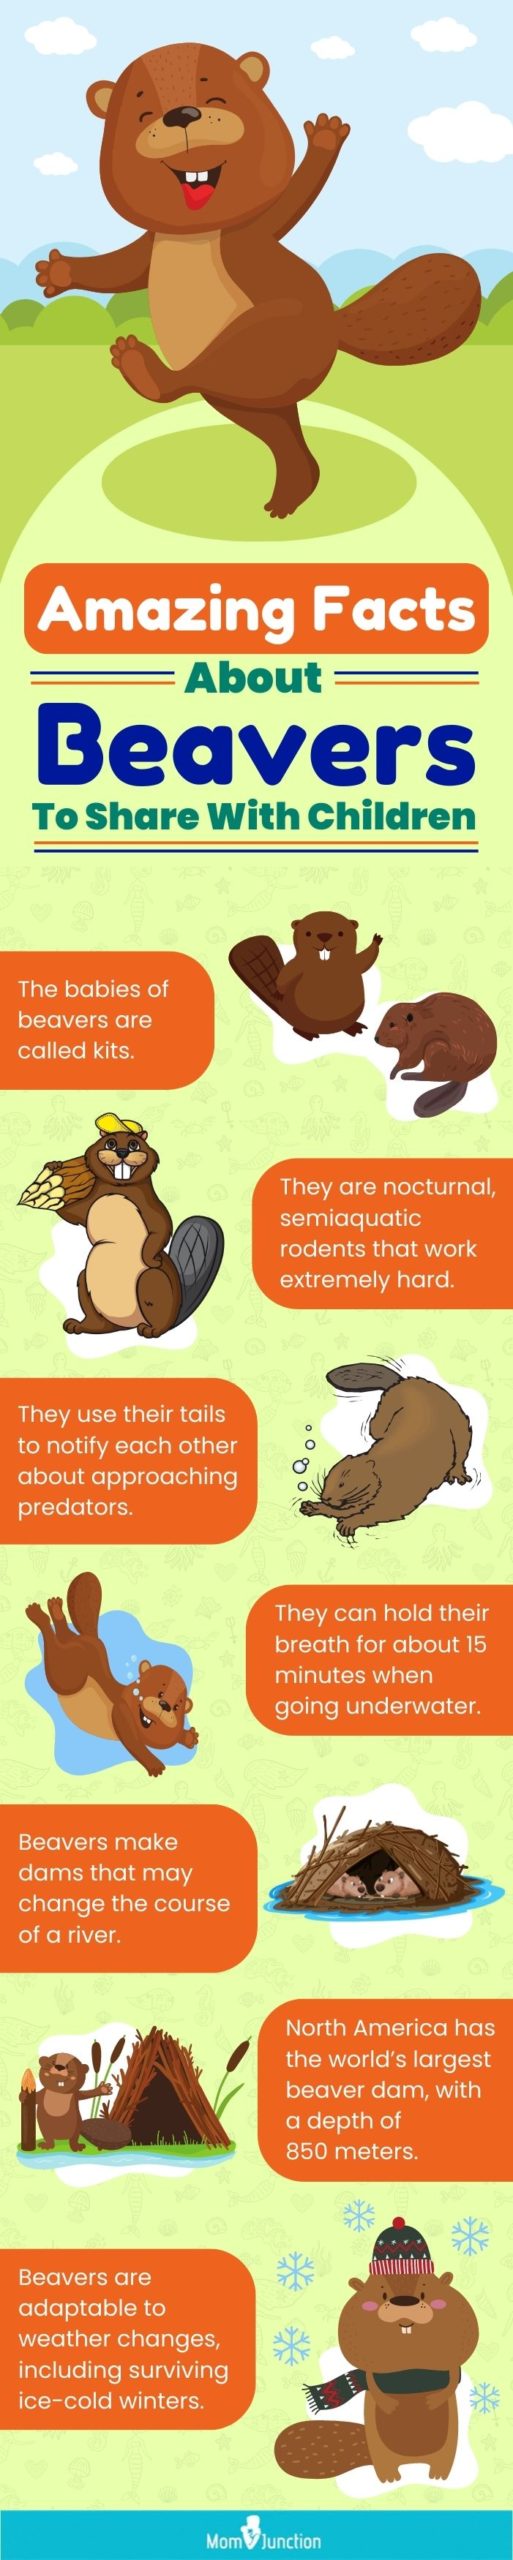 amazing facts about beavers to share with children (infographic)